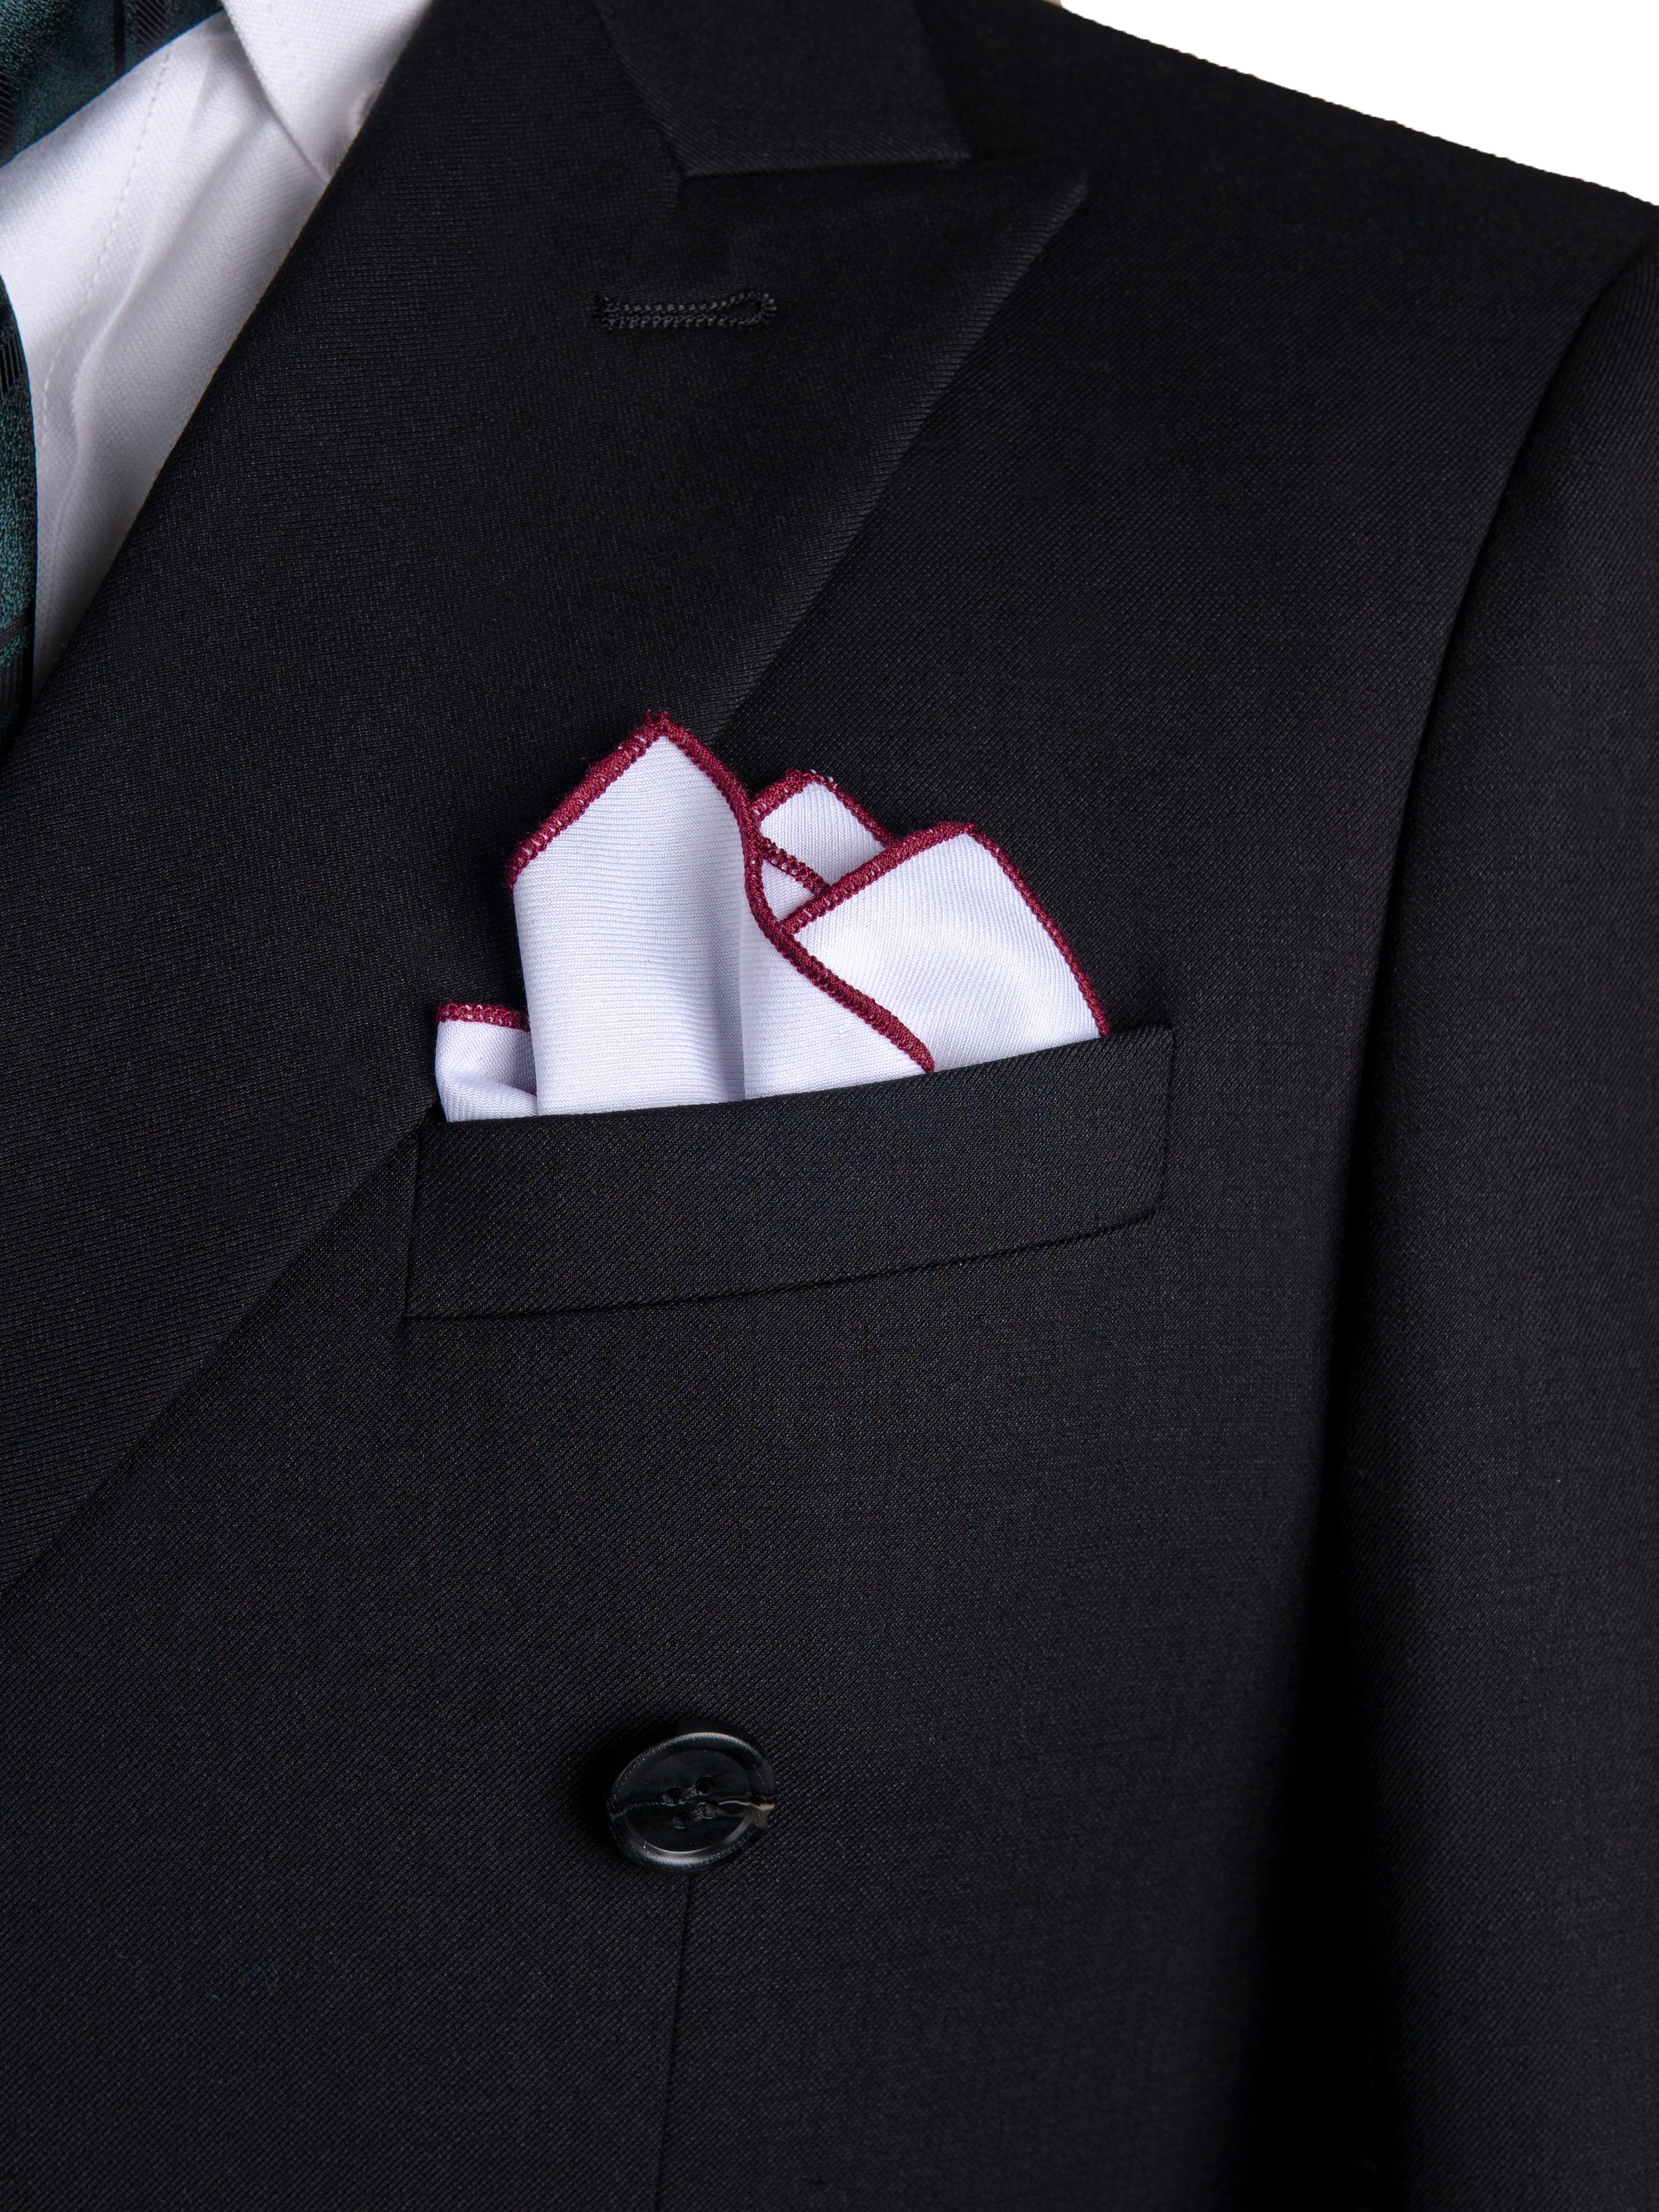 Cotton White Pocket Square with Contrast Piping